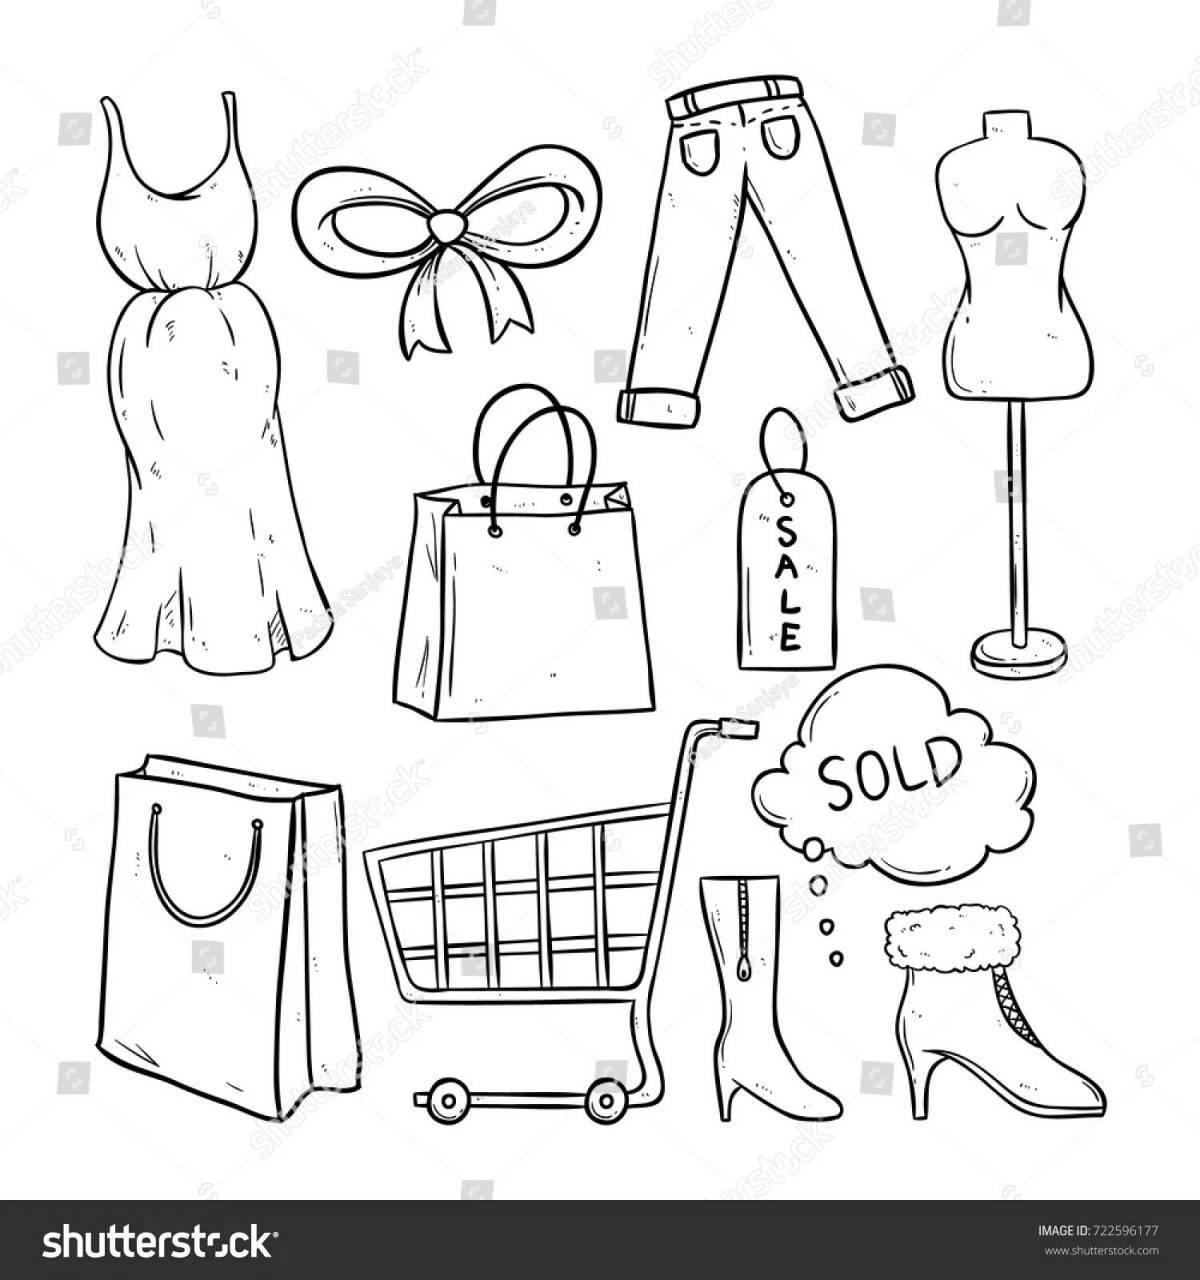 Busy shopping coloring page